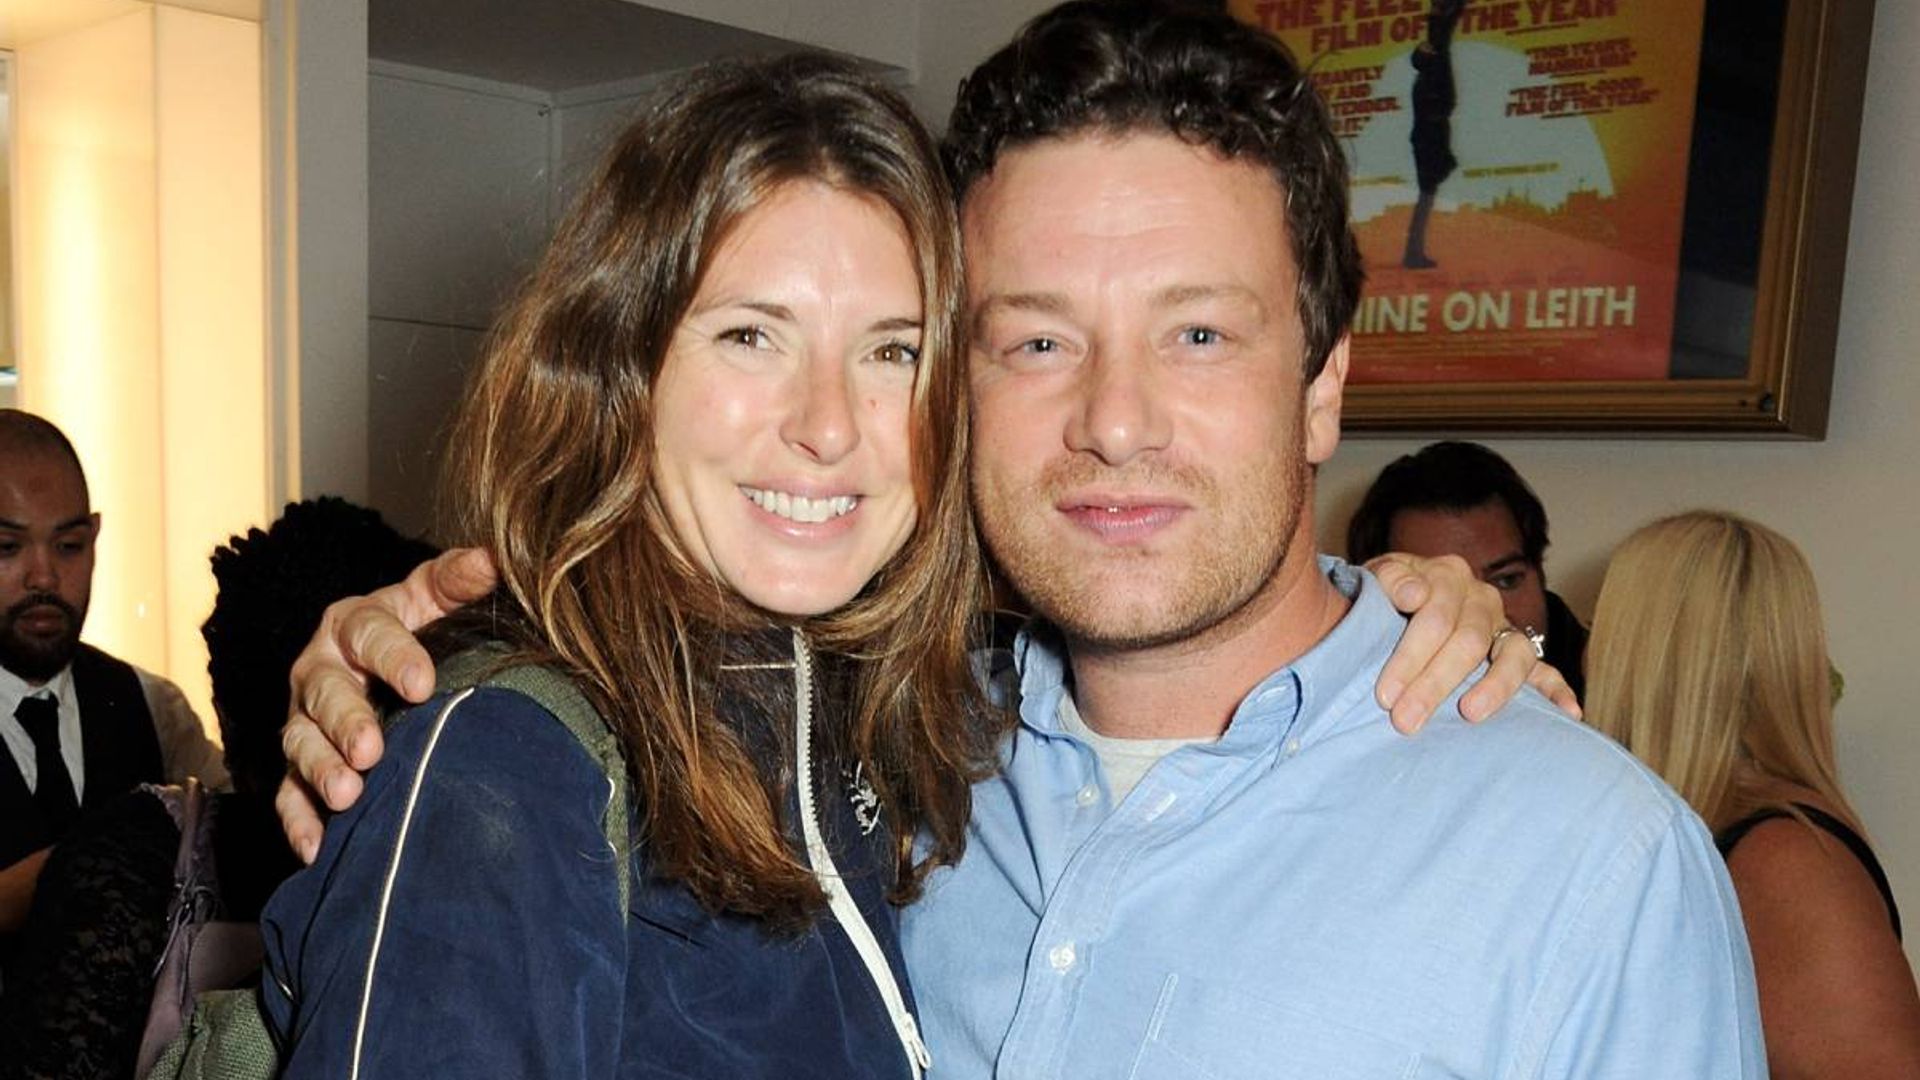 jamie oliver announces exciting news